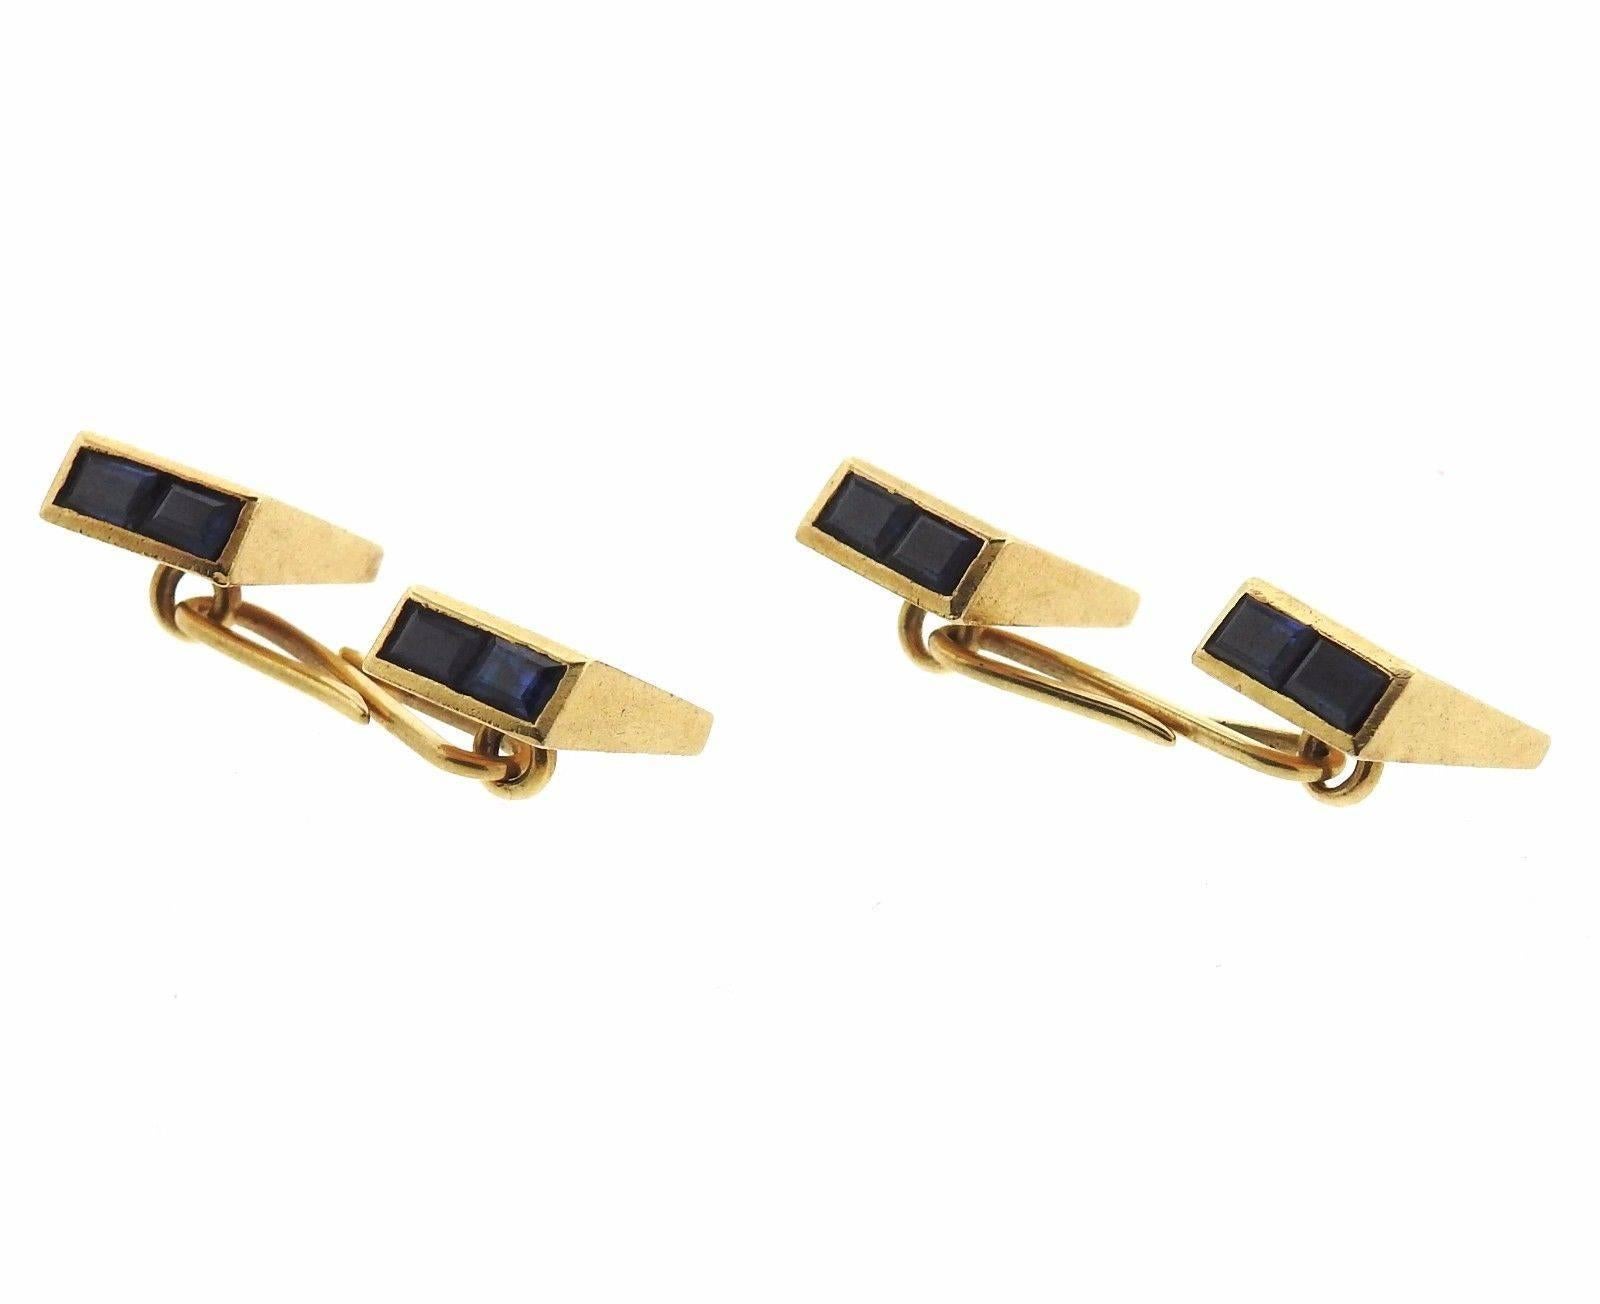 A pair of 14k gold cufflinks set with sapphires.  The cufflinks measure 13mm x 9mm.  The weight of the set is 11 grams.